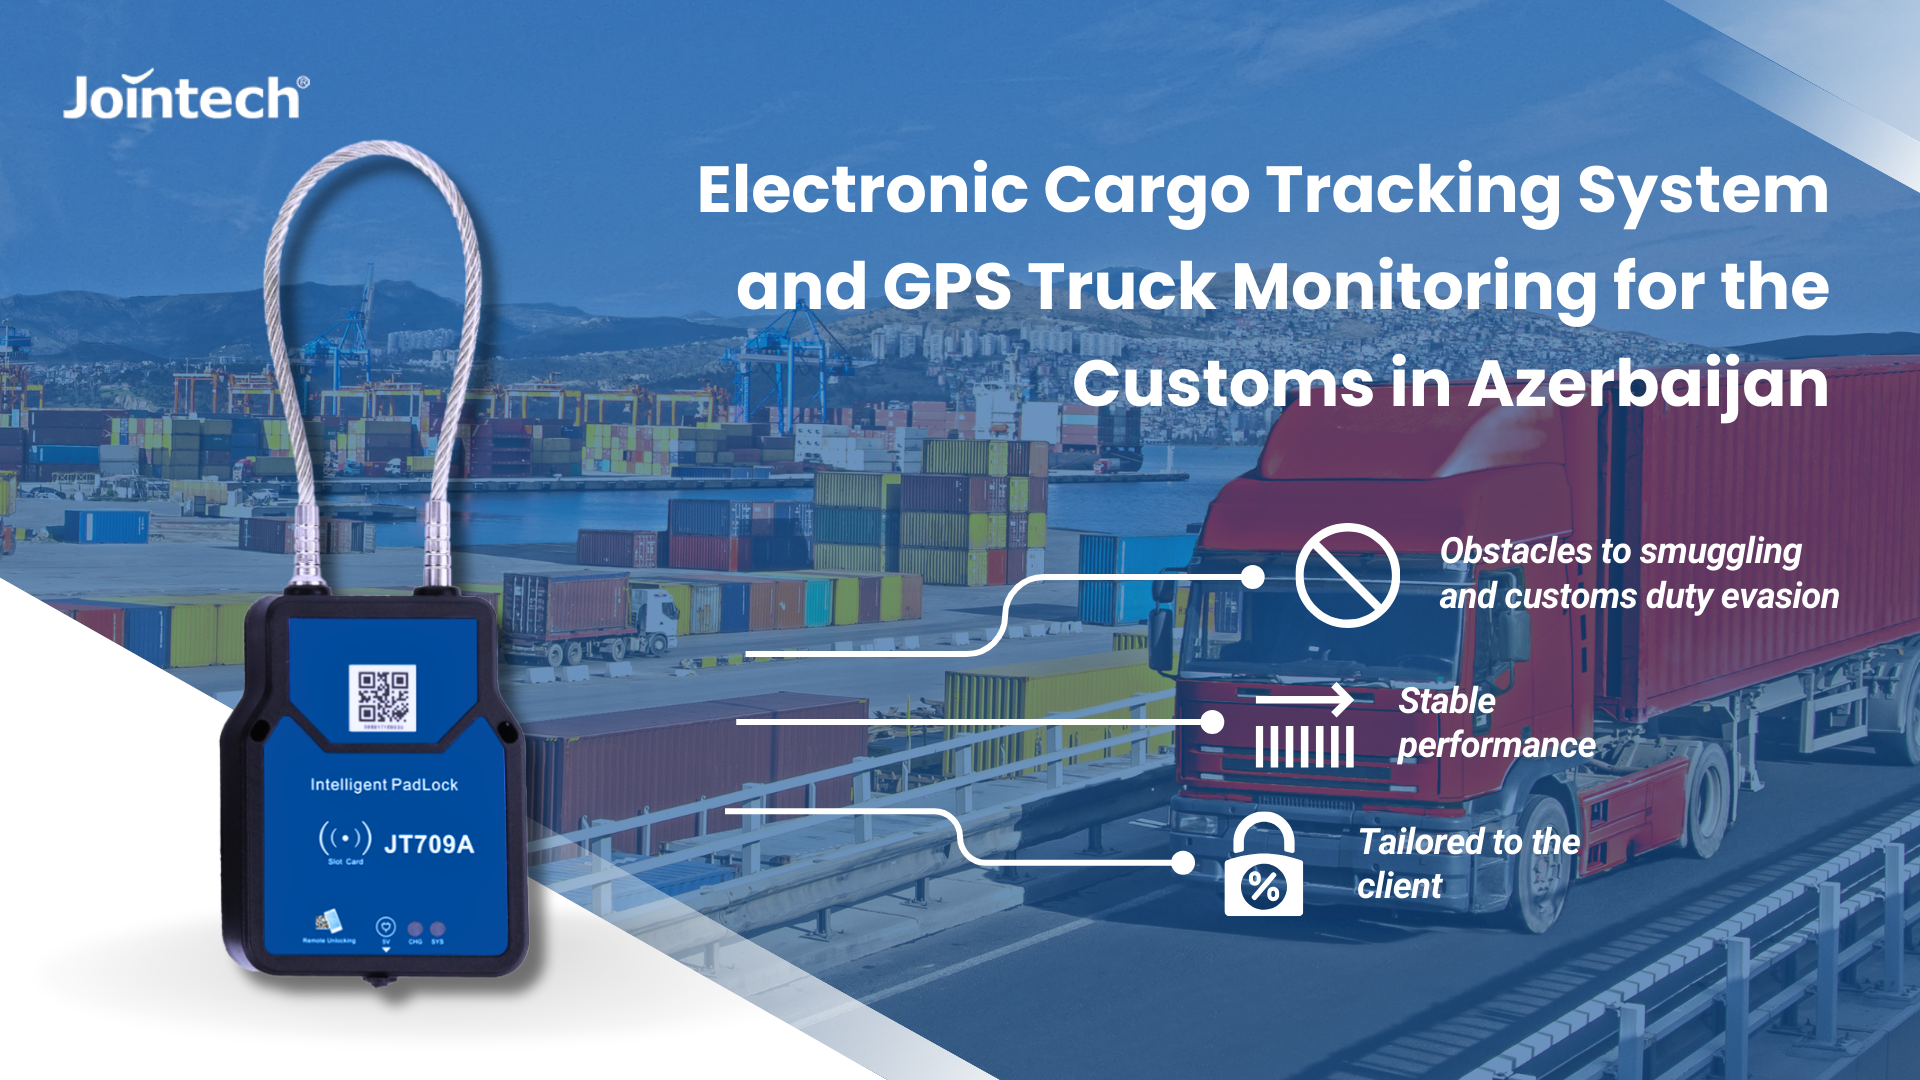 Electronic Cargo Tracking System And GPS Truck Monitoring for The Customs in Azerbaijan